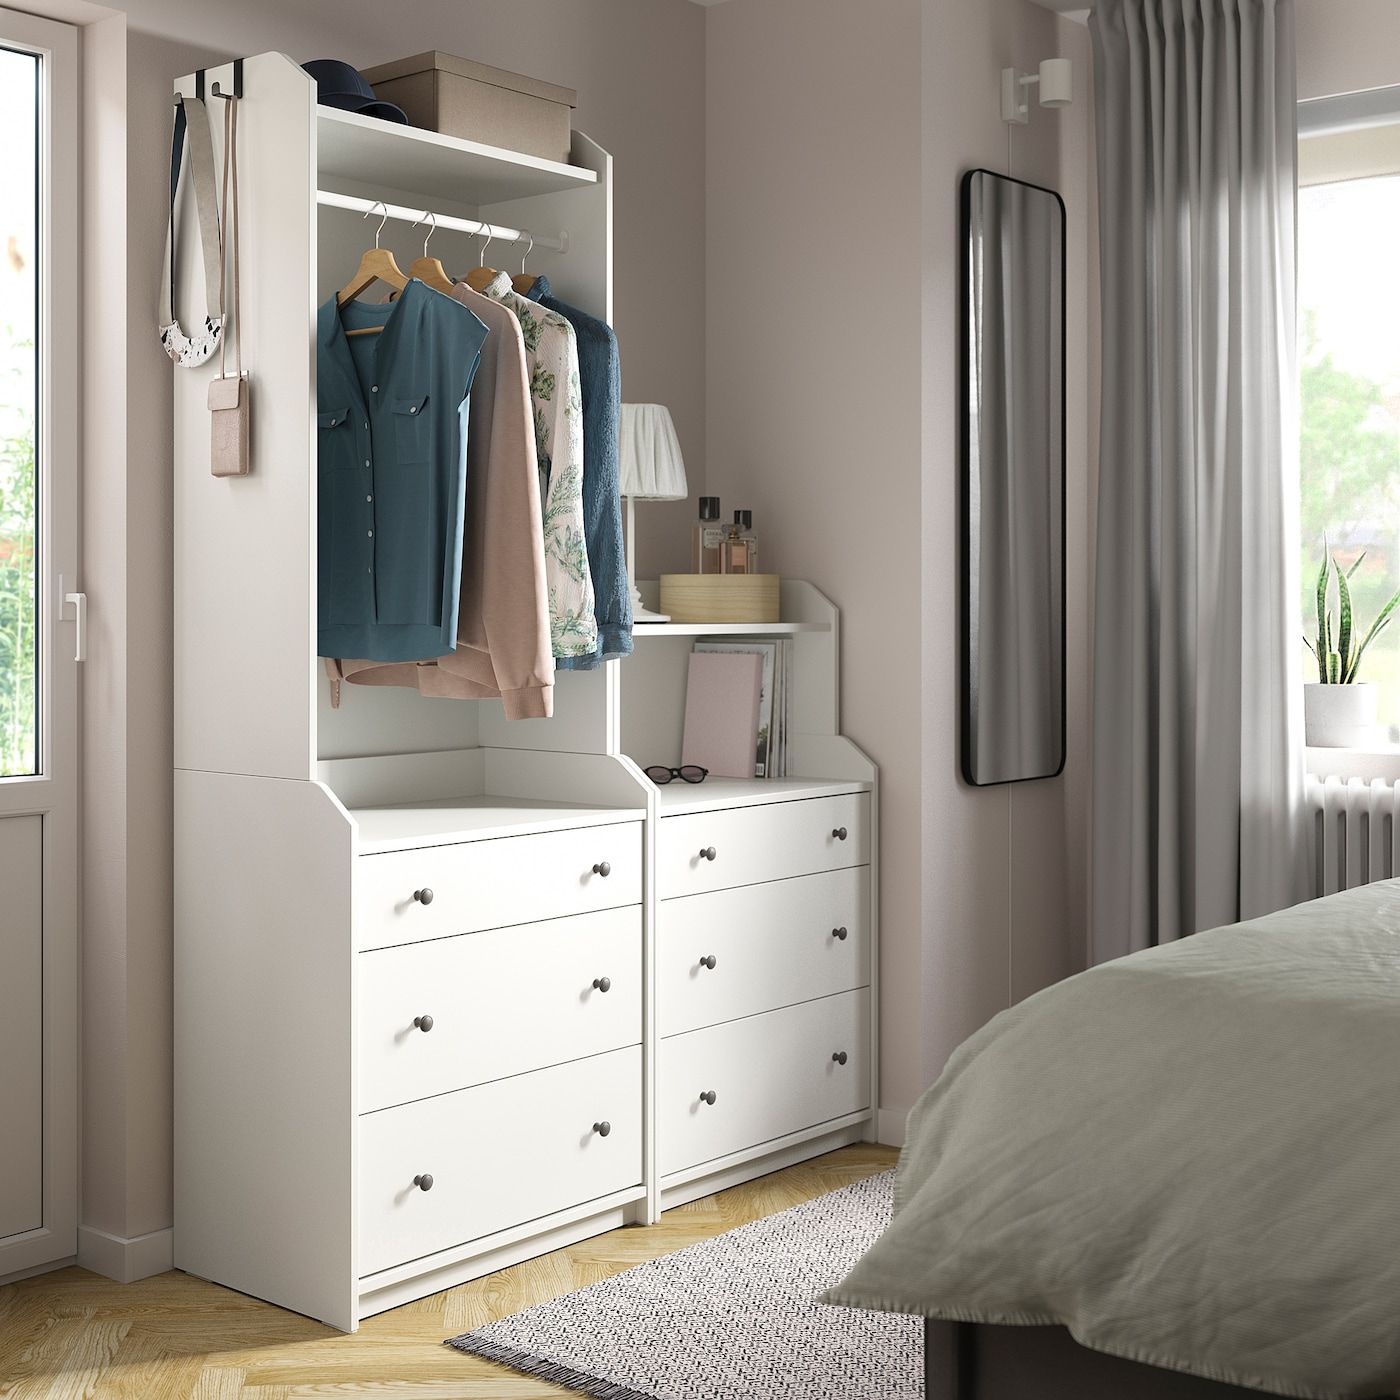 Hauga Storage Combination, White, 551/8x783/8" – Ikea In Wardrobes Chest Of Drawers Combination (View 17 of 20)